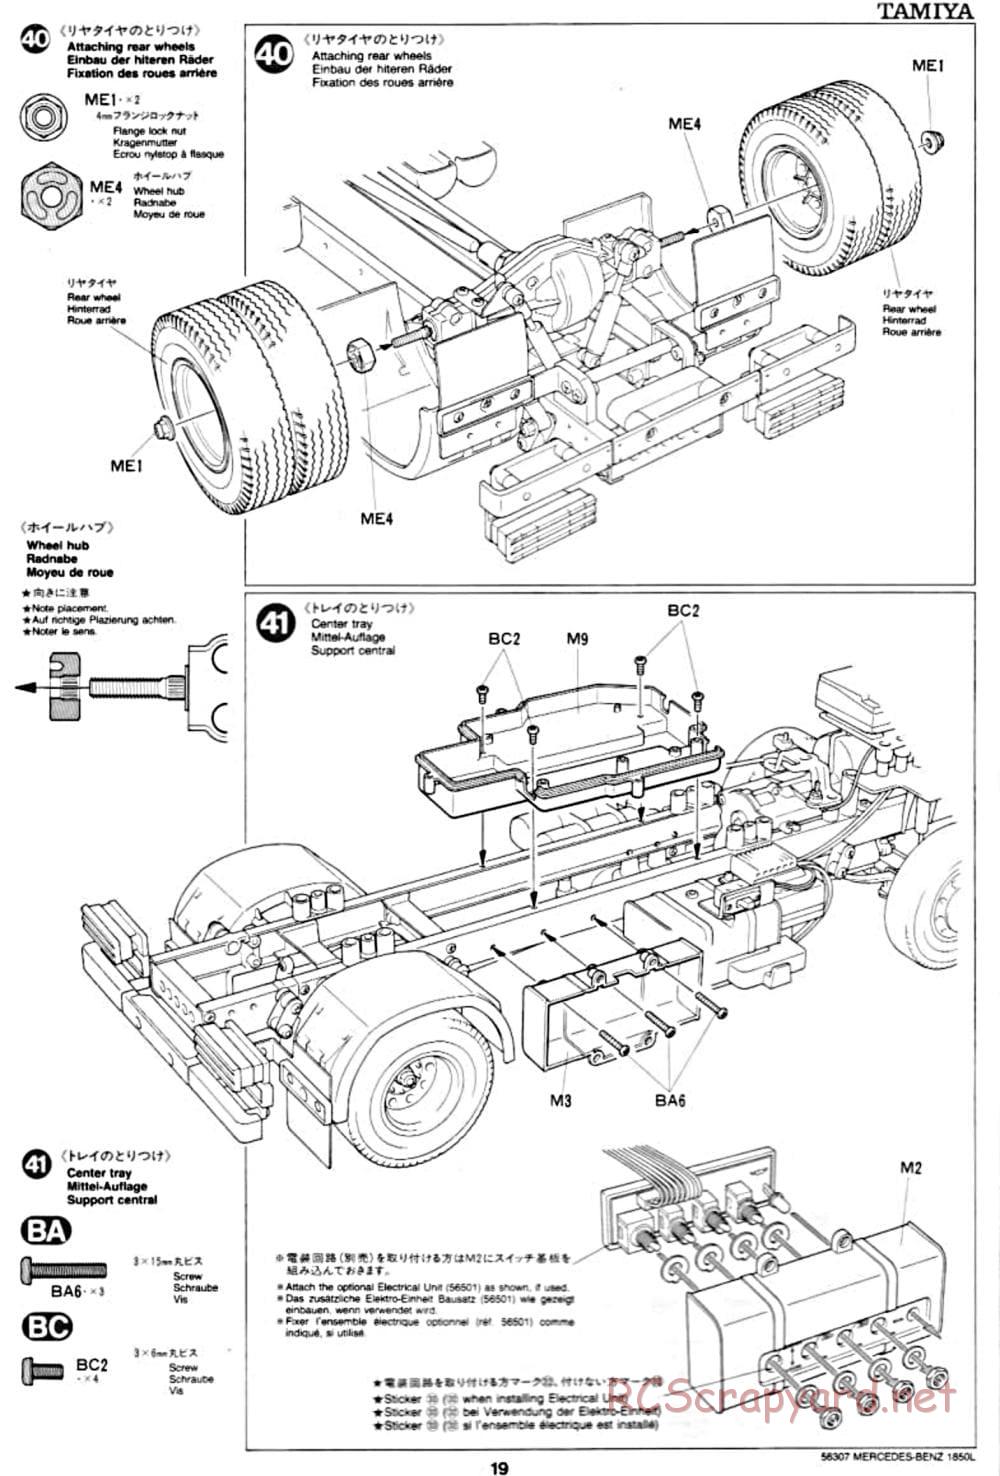 Tamiya - Mercedes-Benz 1850L Delivery Truck - Manual - Page 19